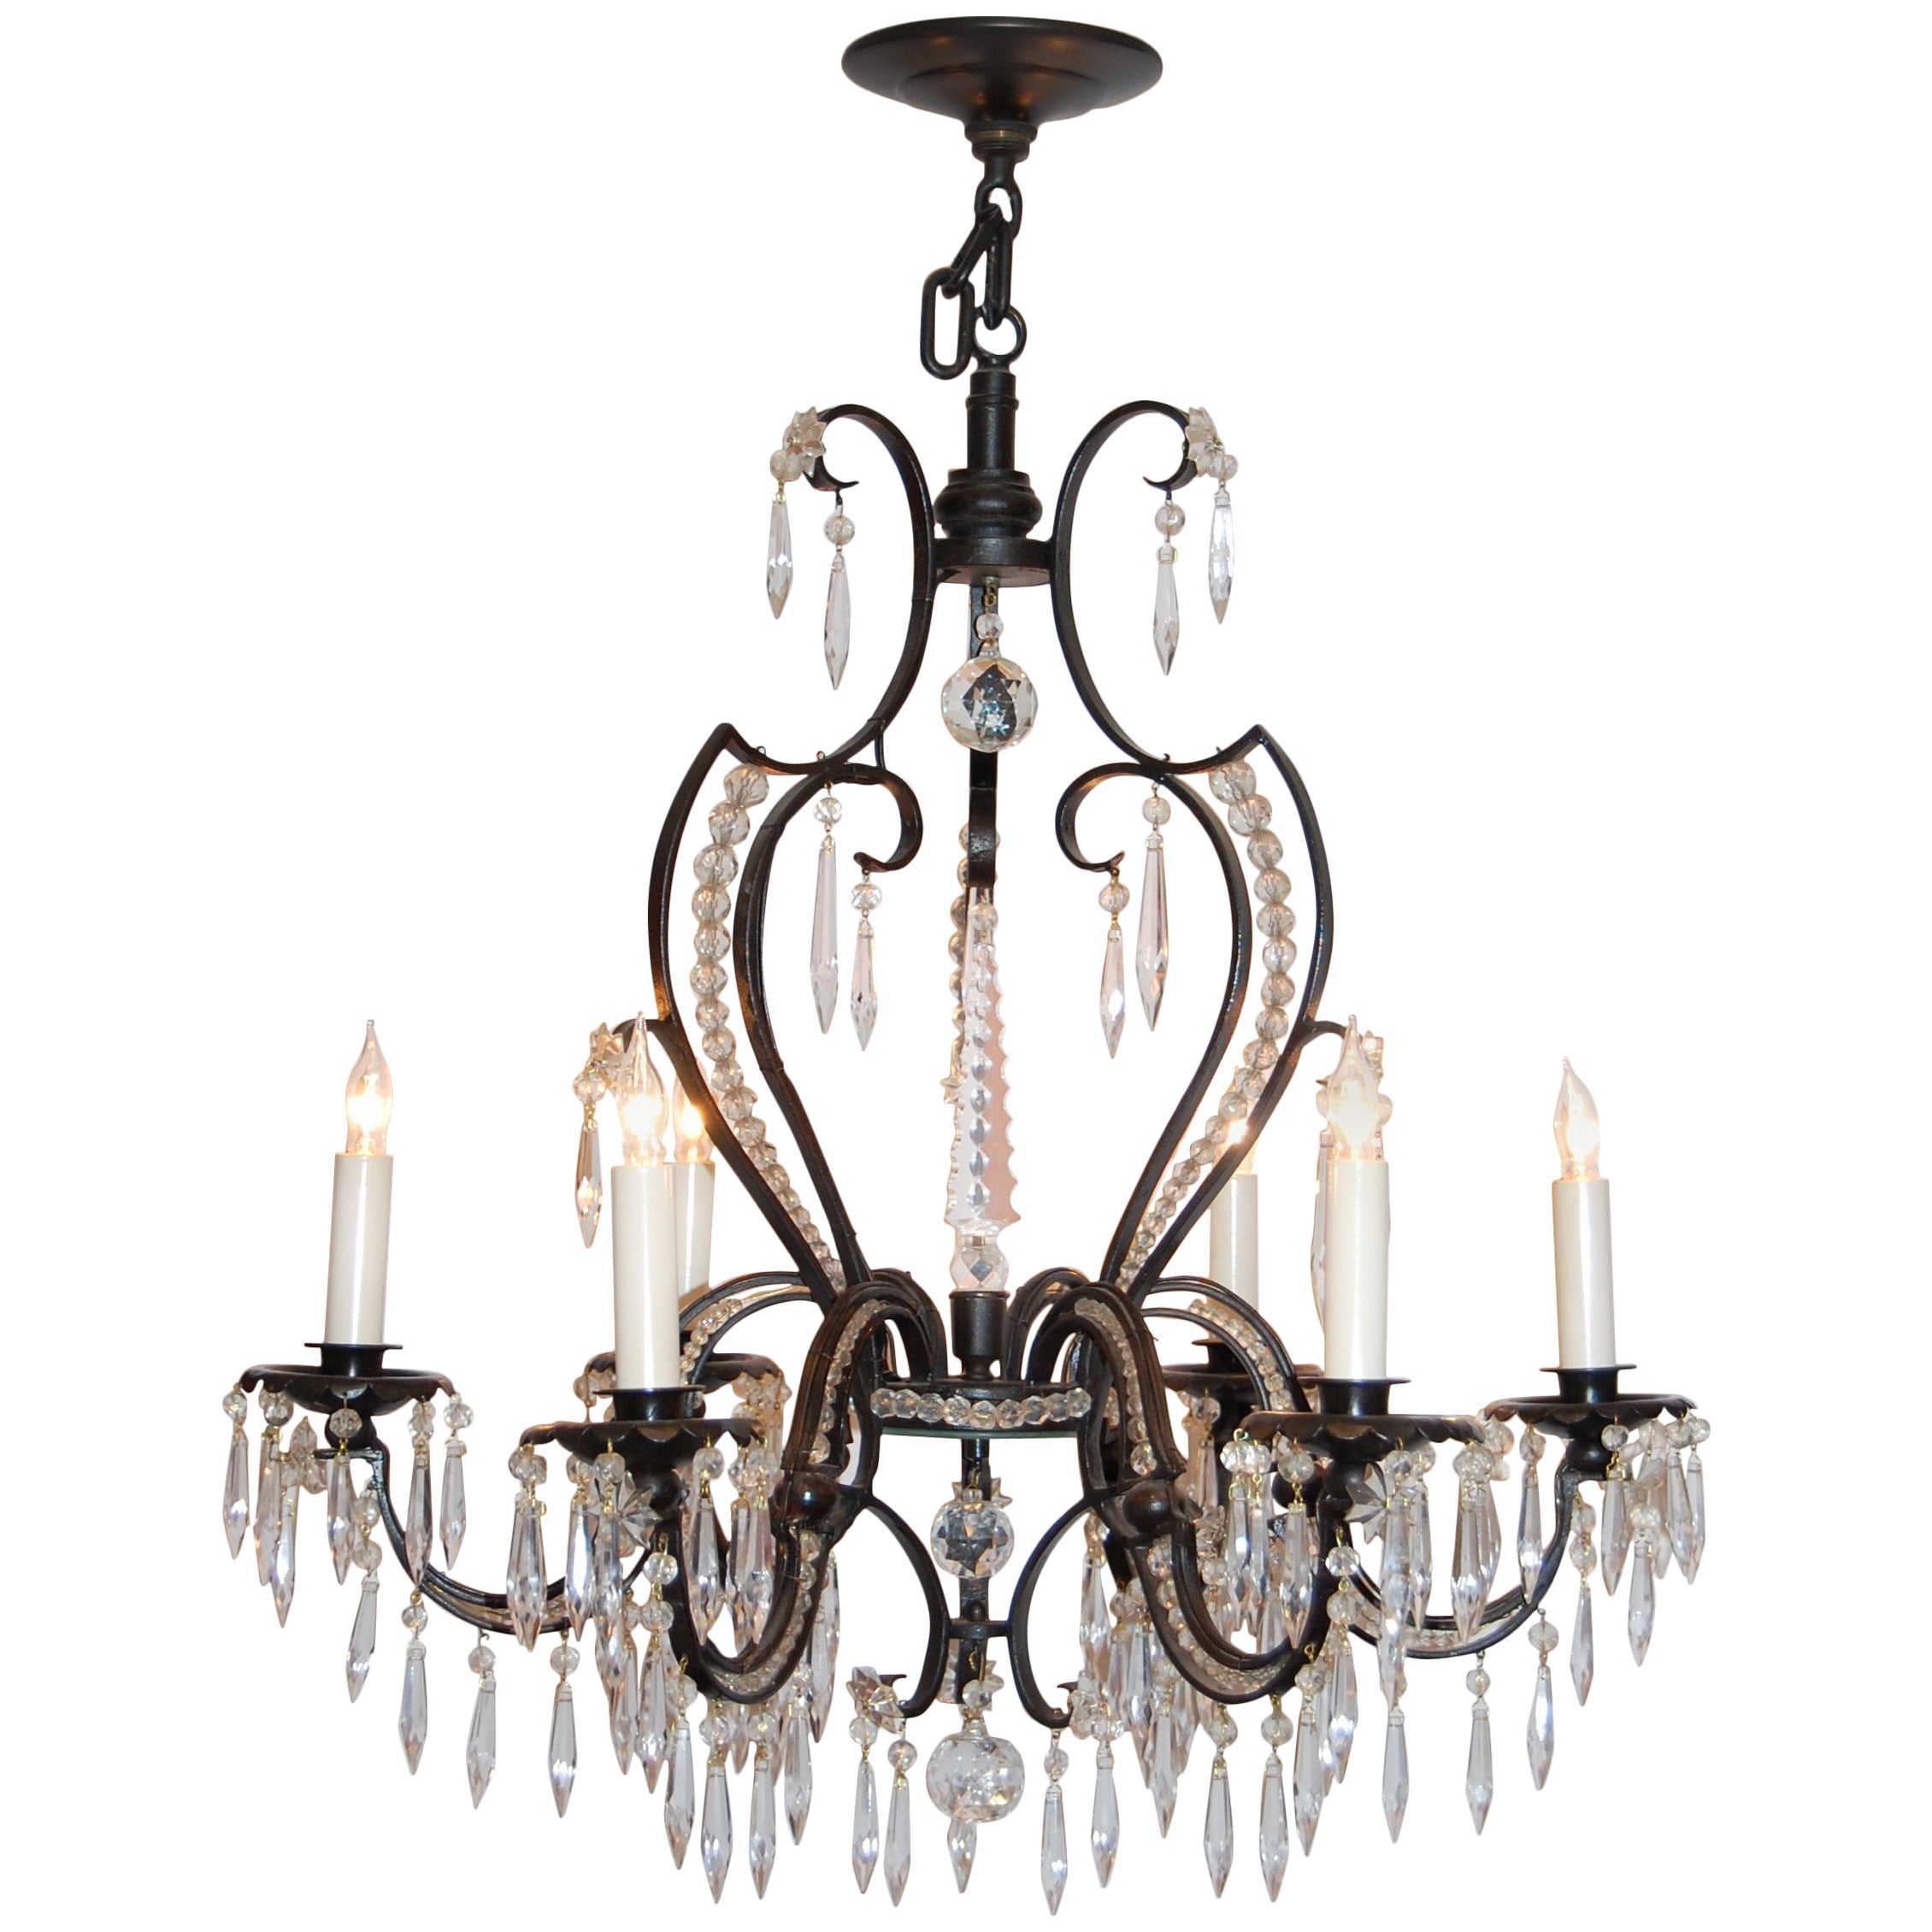 Iron and Crystal Six-Light Chandelier, circa 1920s - 1930s For Sale